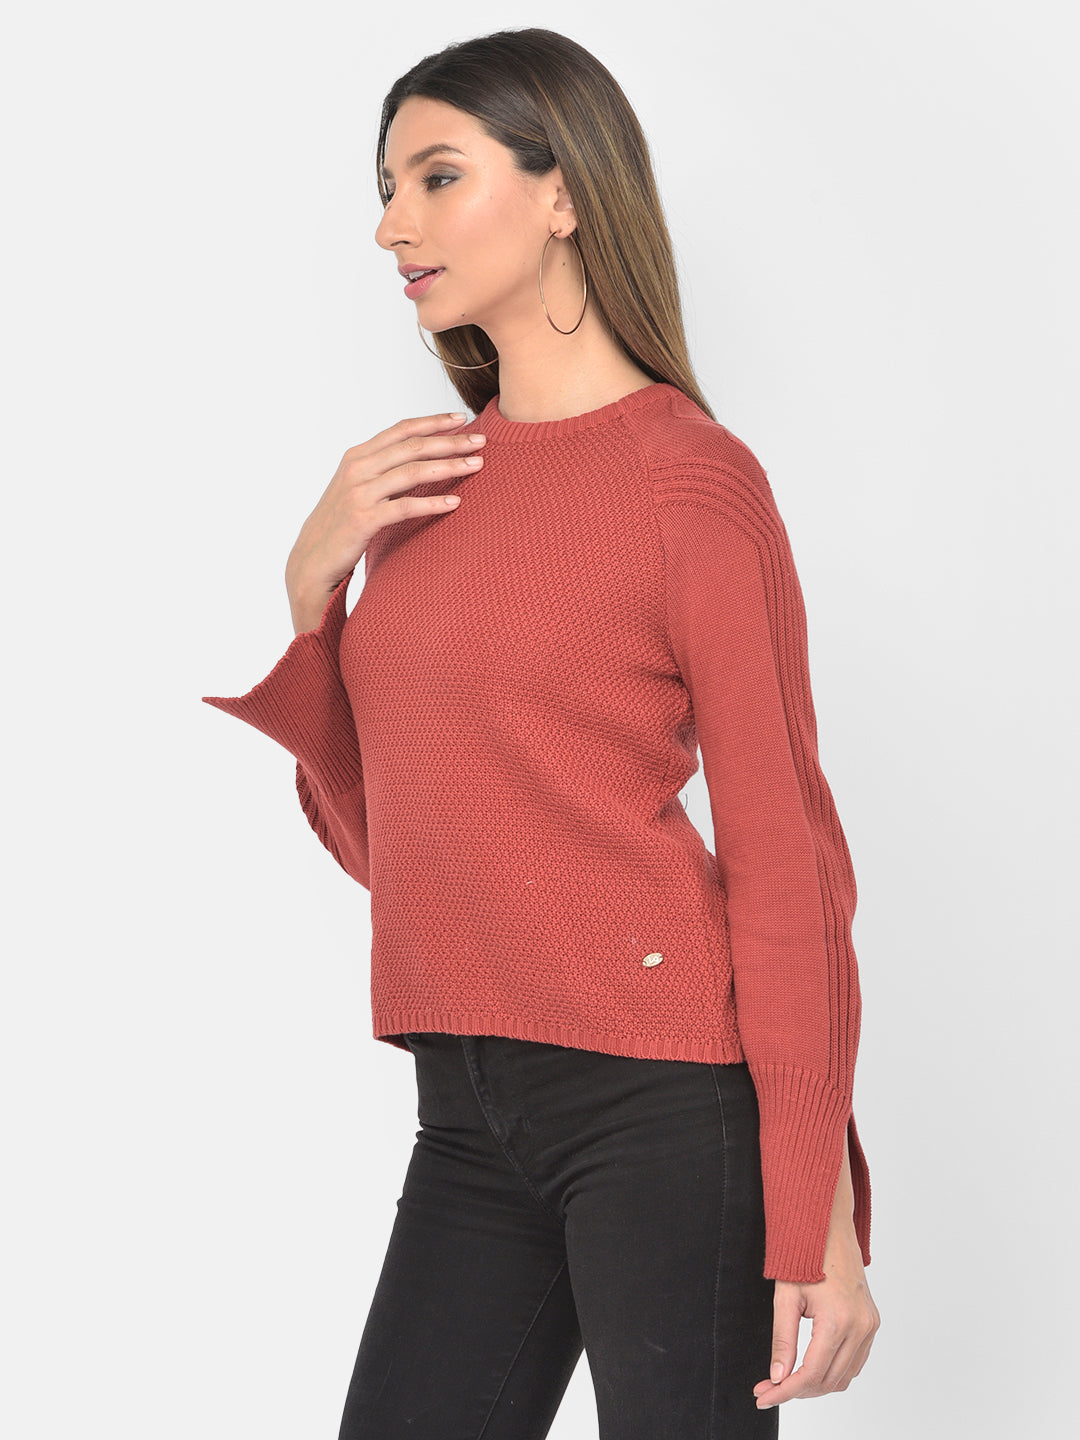 Sweater With Cable Design on Sleeves